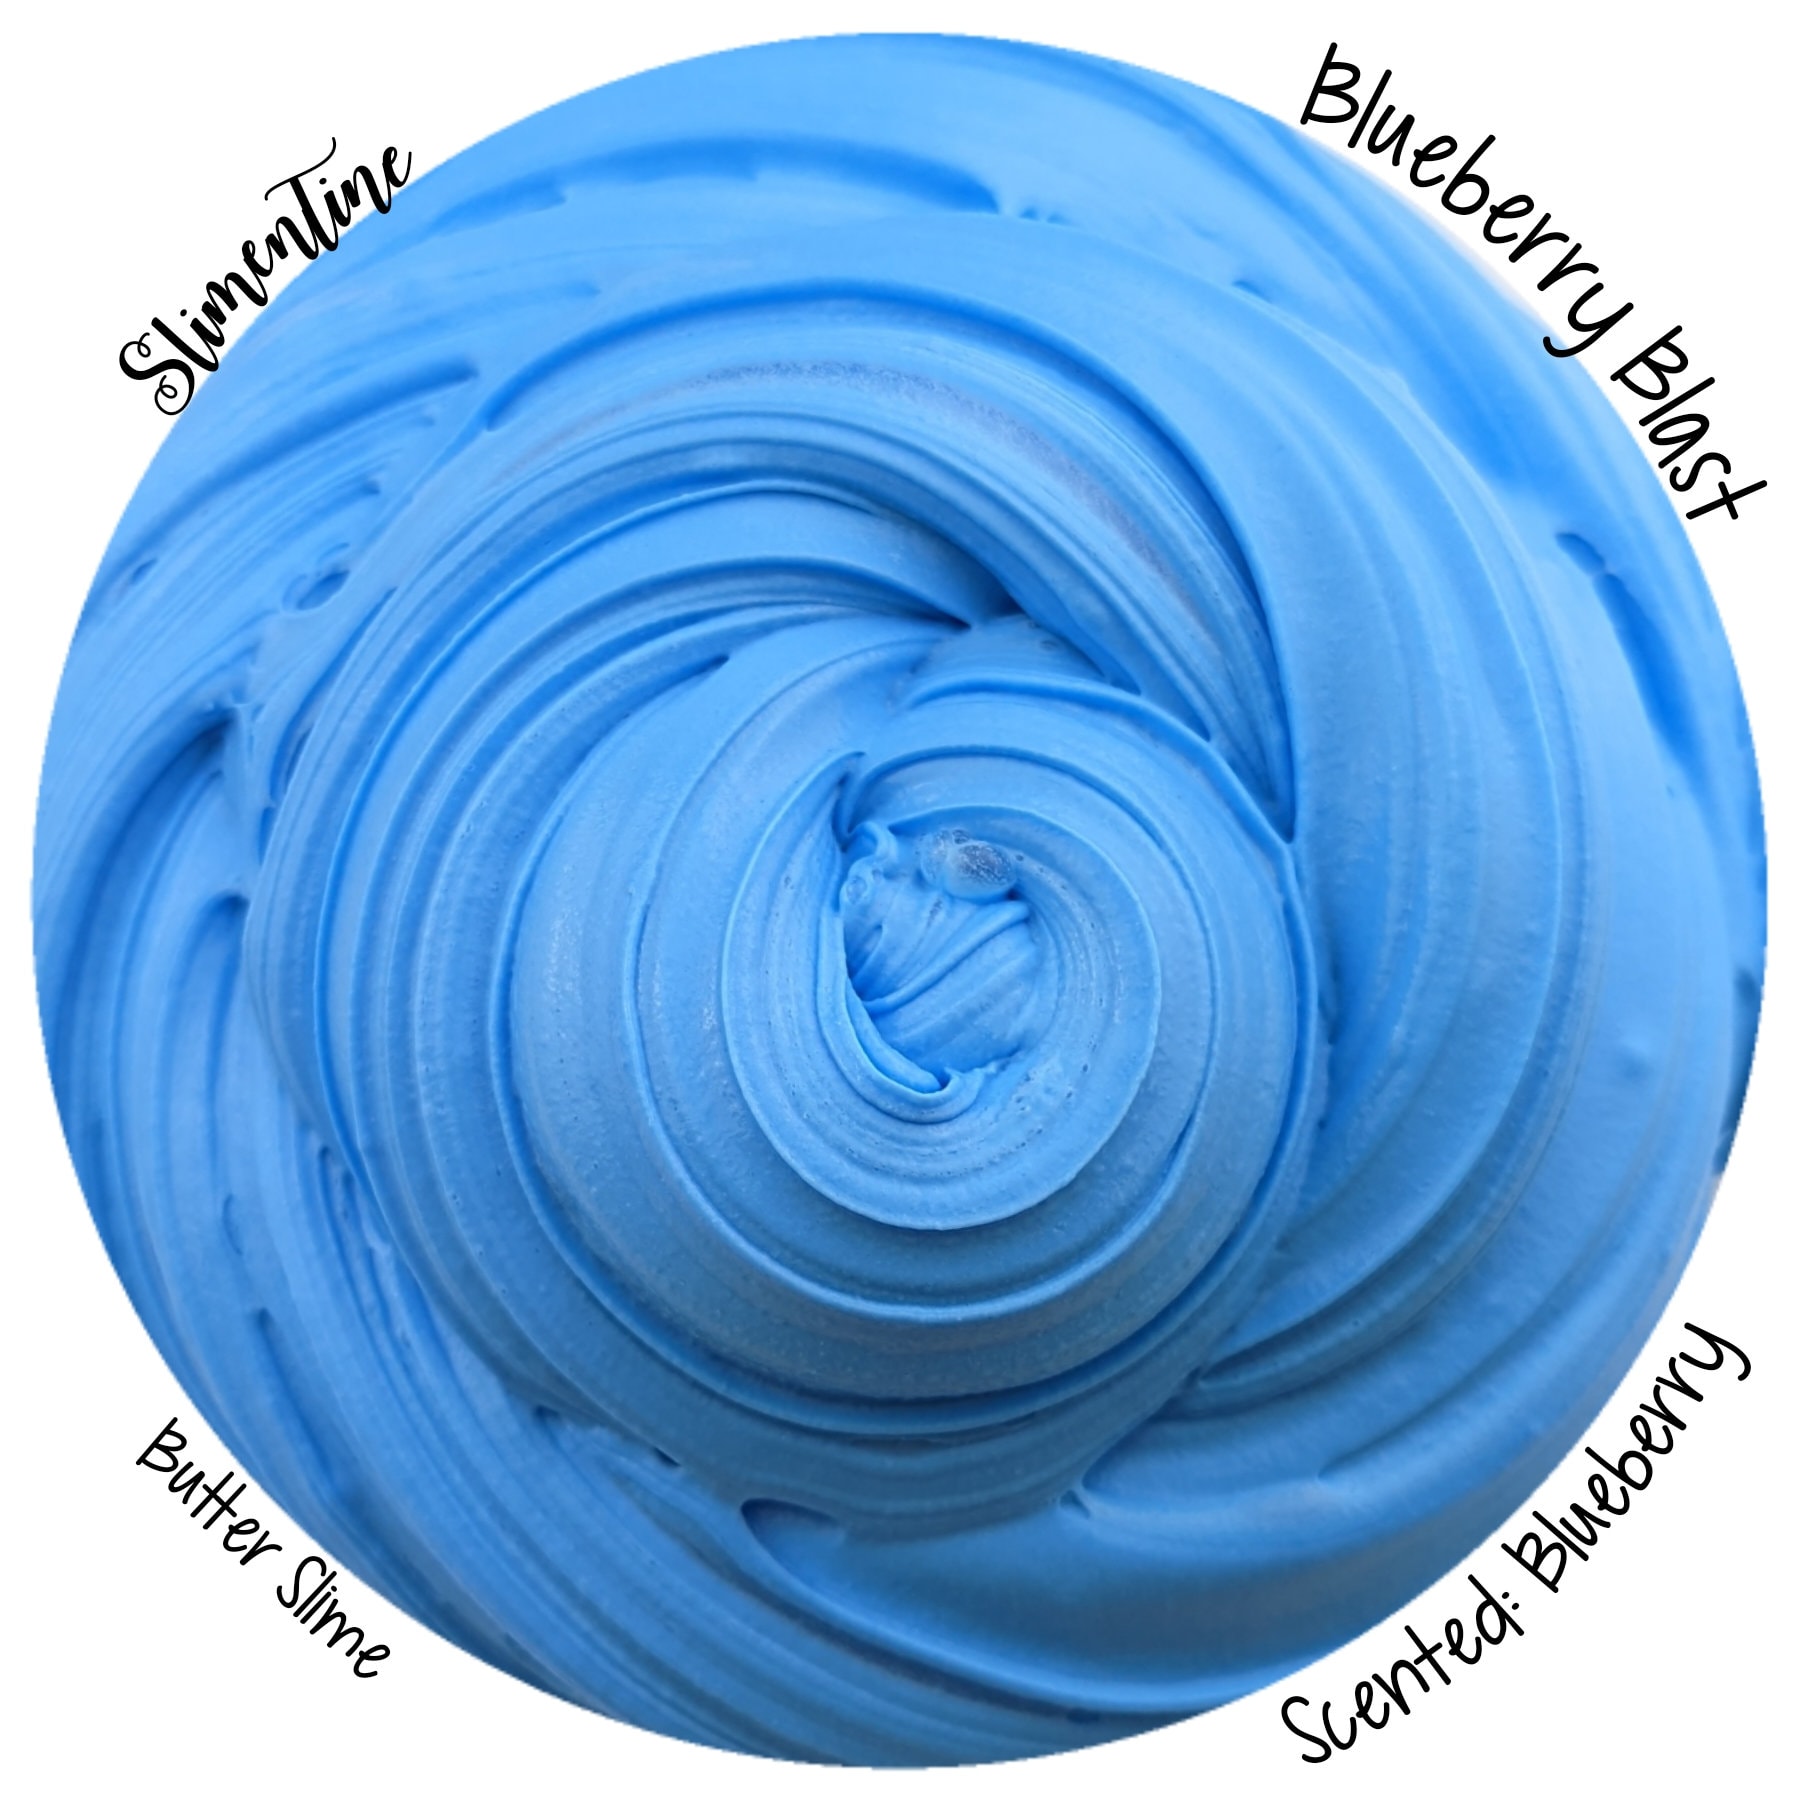 Daiso Moist Smooth Air-Dry Clay, Perfect For Butter Slime and